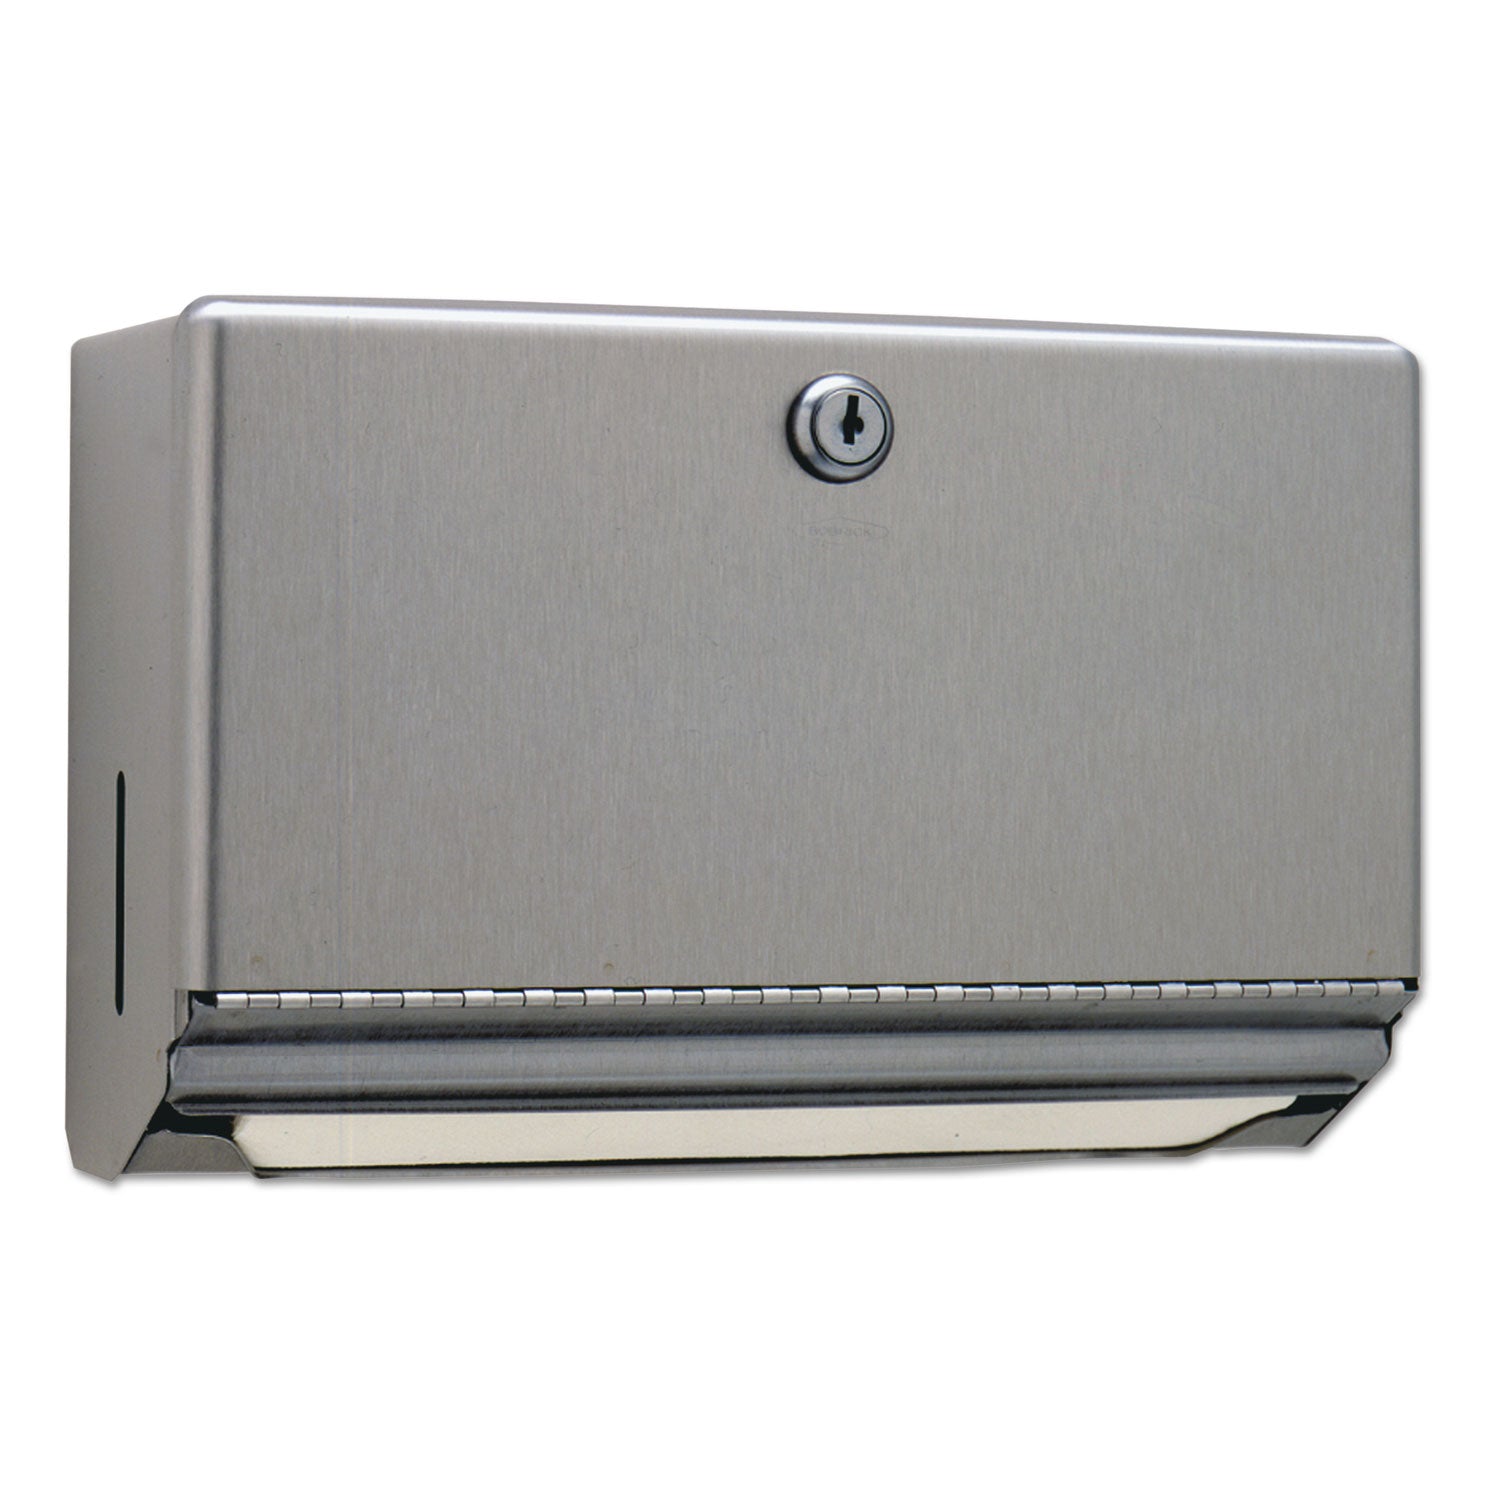 surface-mounted-paper-towel-dispenser-1075-x-4-x-706-stainless-steel_bob26212 - 1